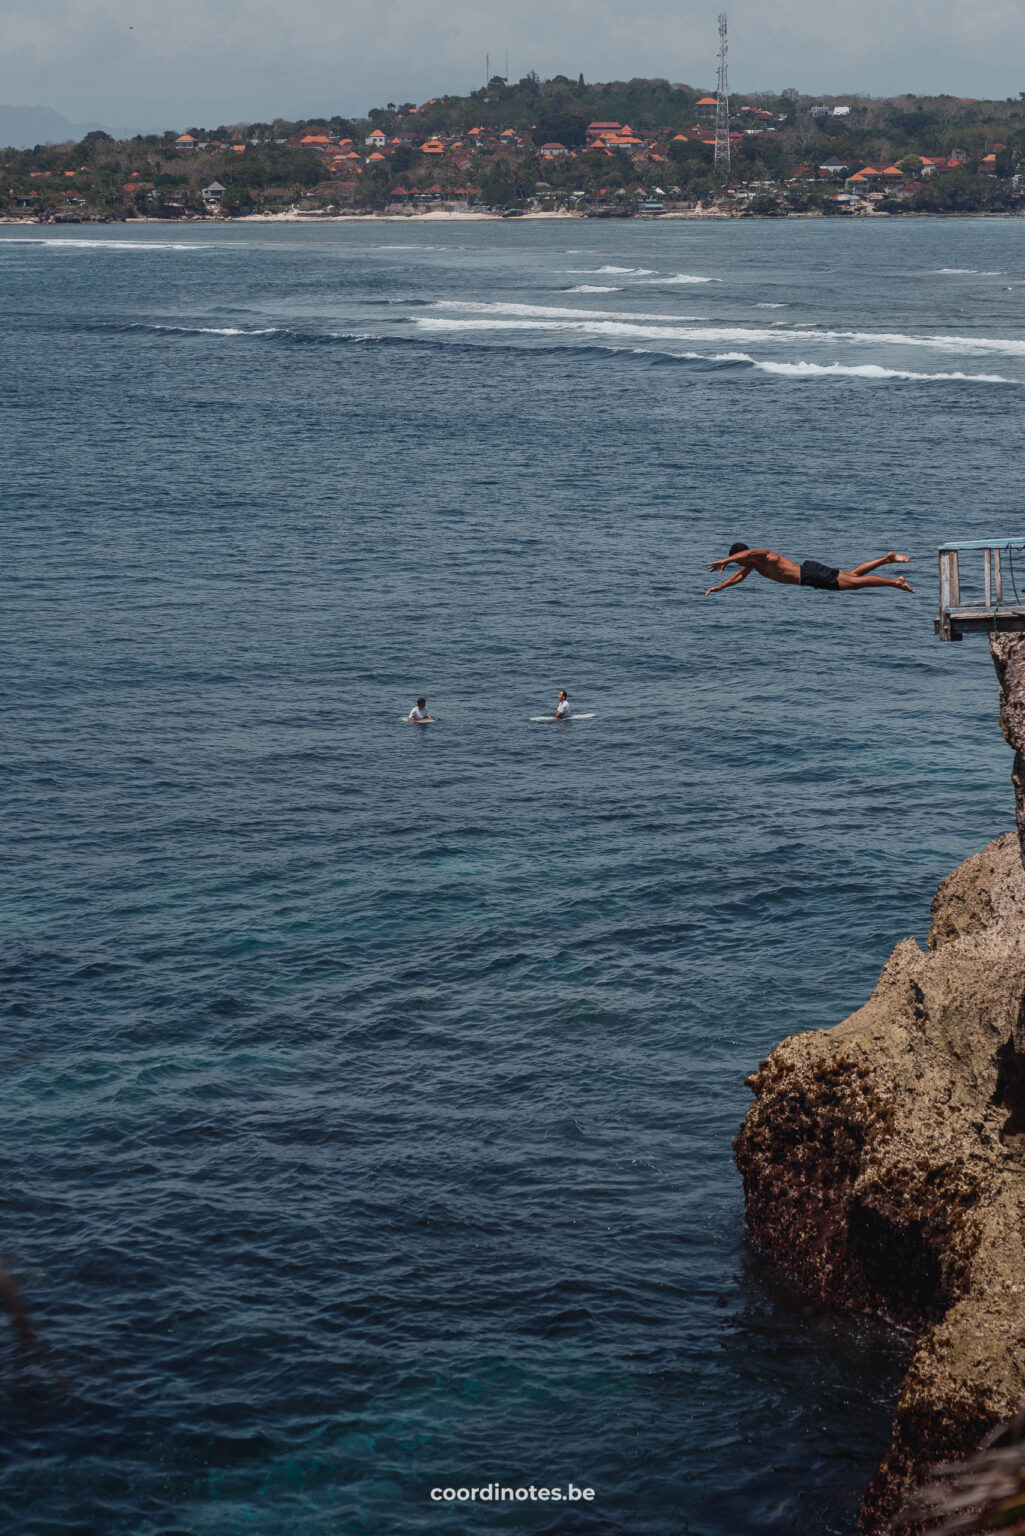 Cliff diving in Nusa Ceningan, one of the most spectacular things to do on Nusa Lembongan